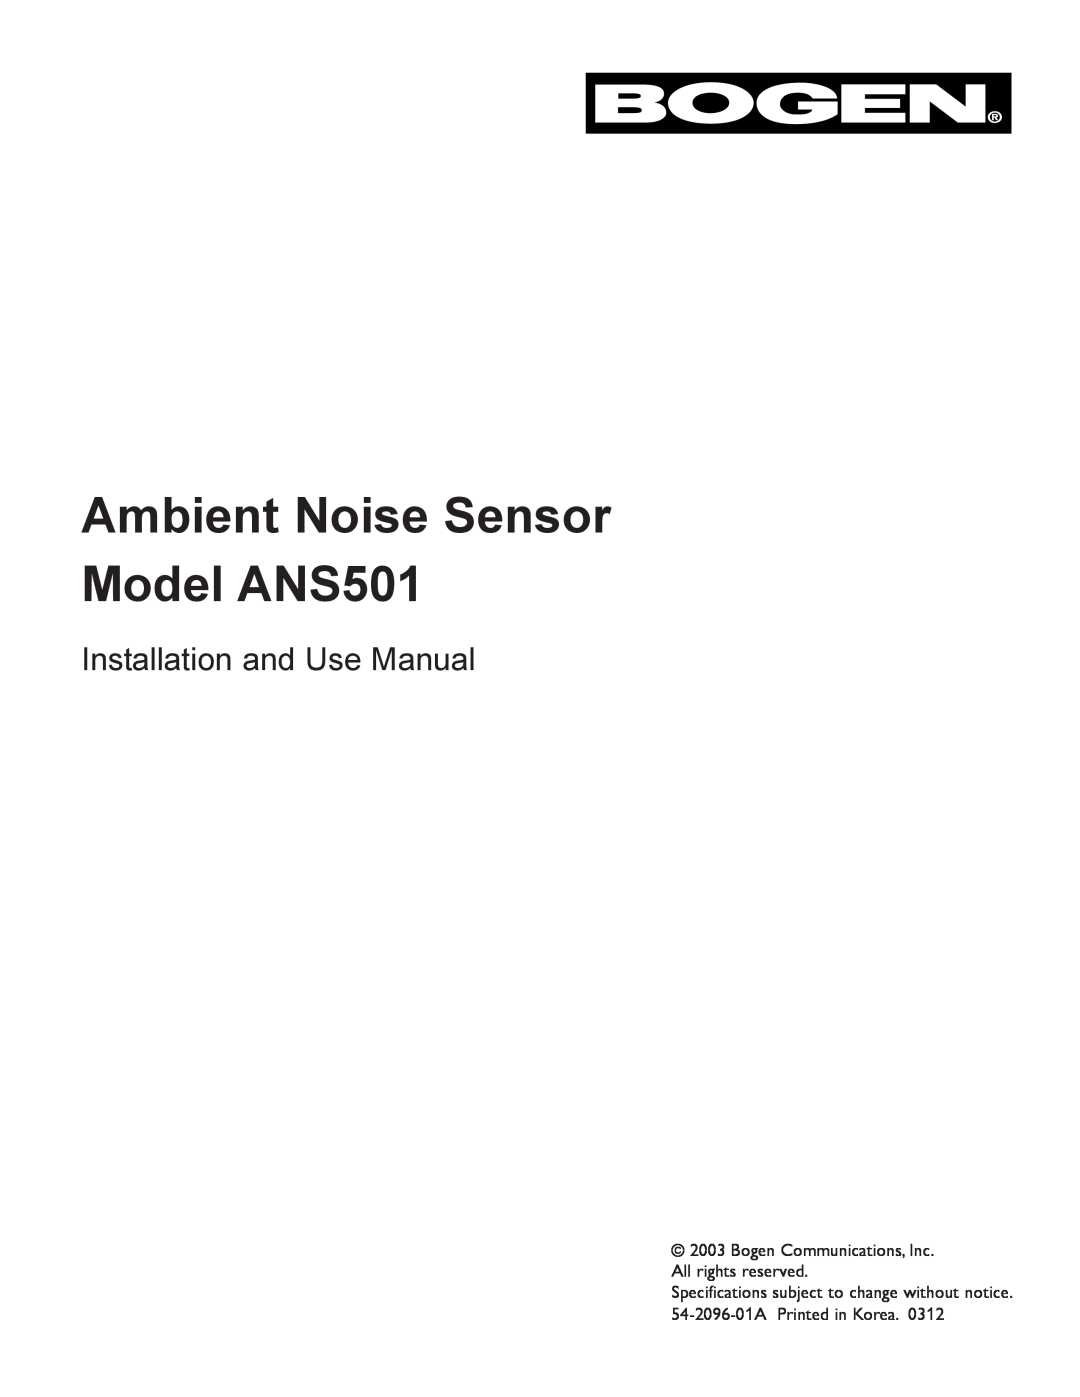 Bogen specifications Ambient Noise Sensor Model ANS501, Installation and Use Manual 